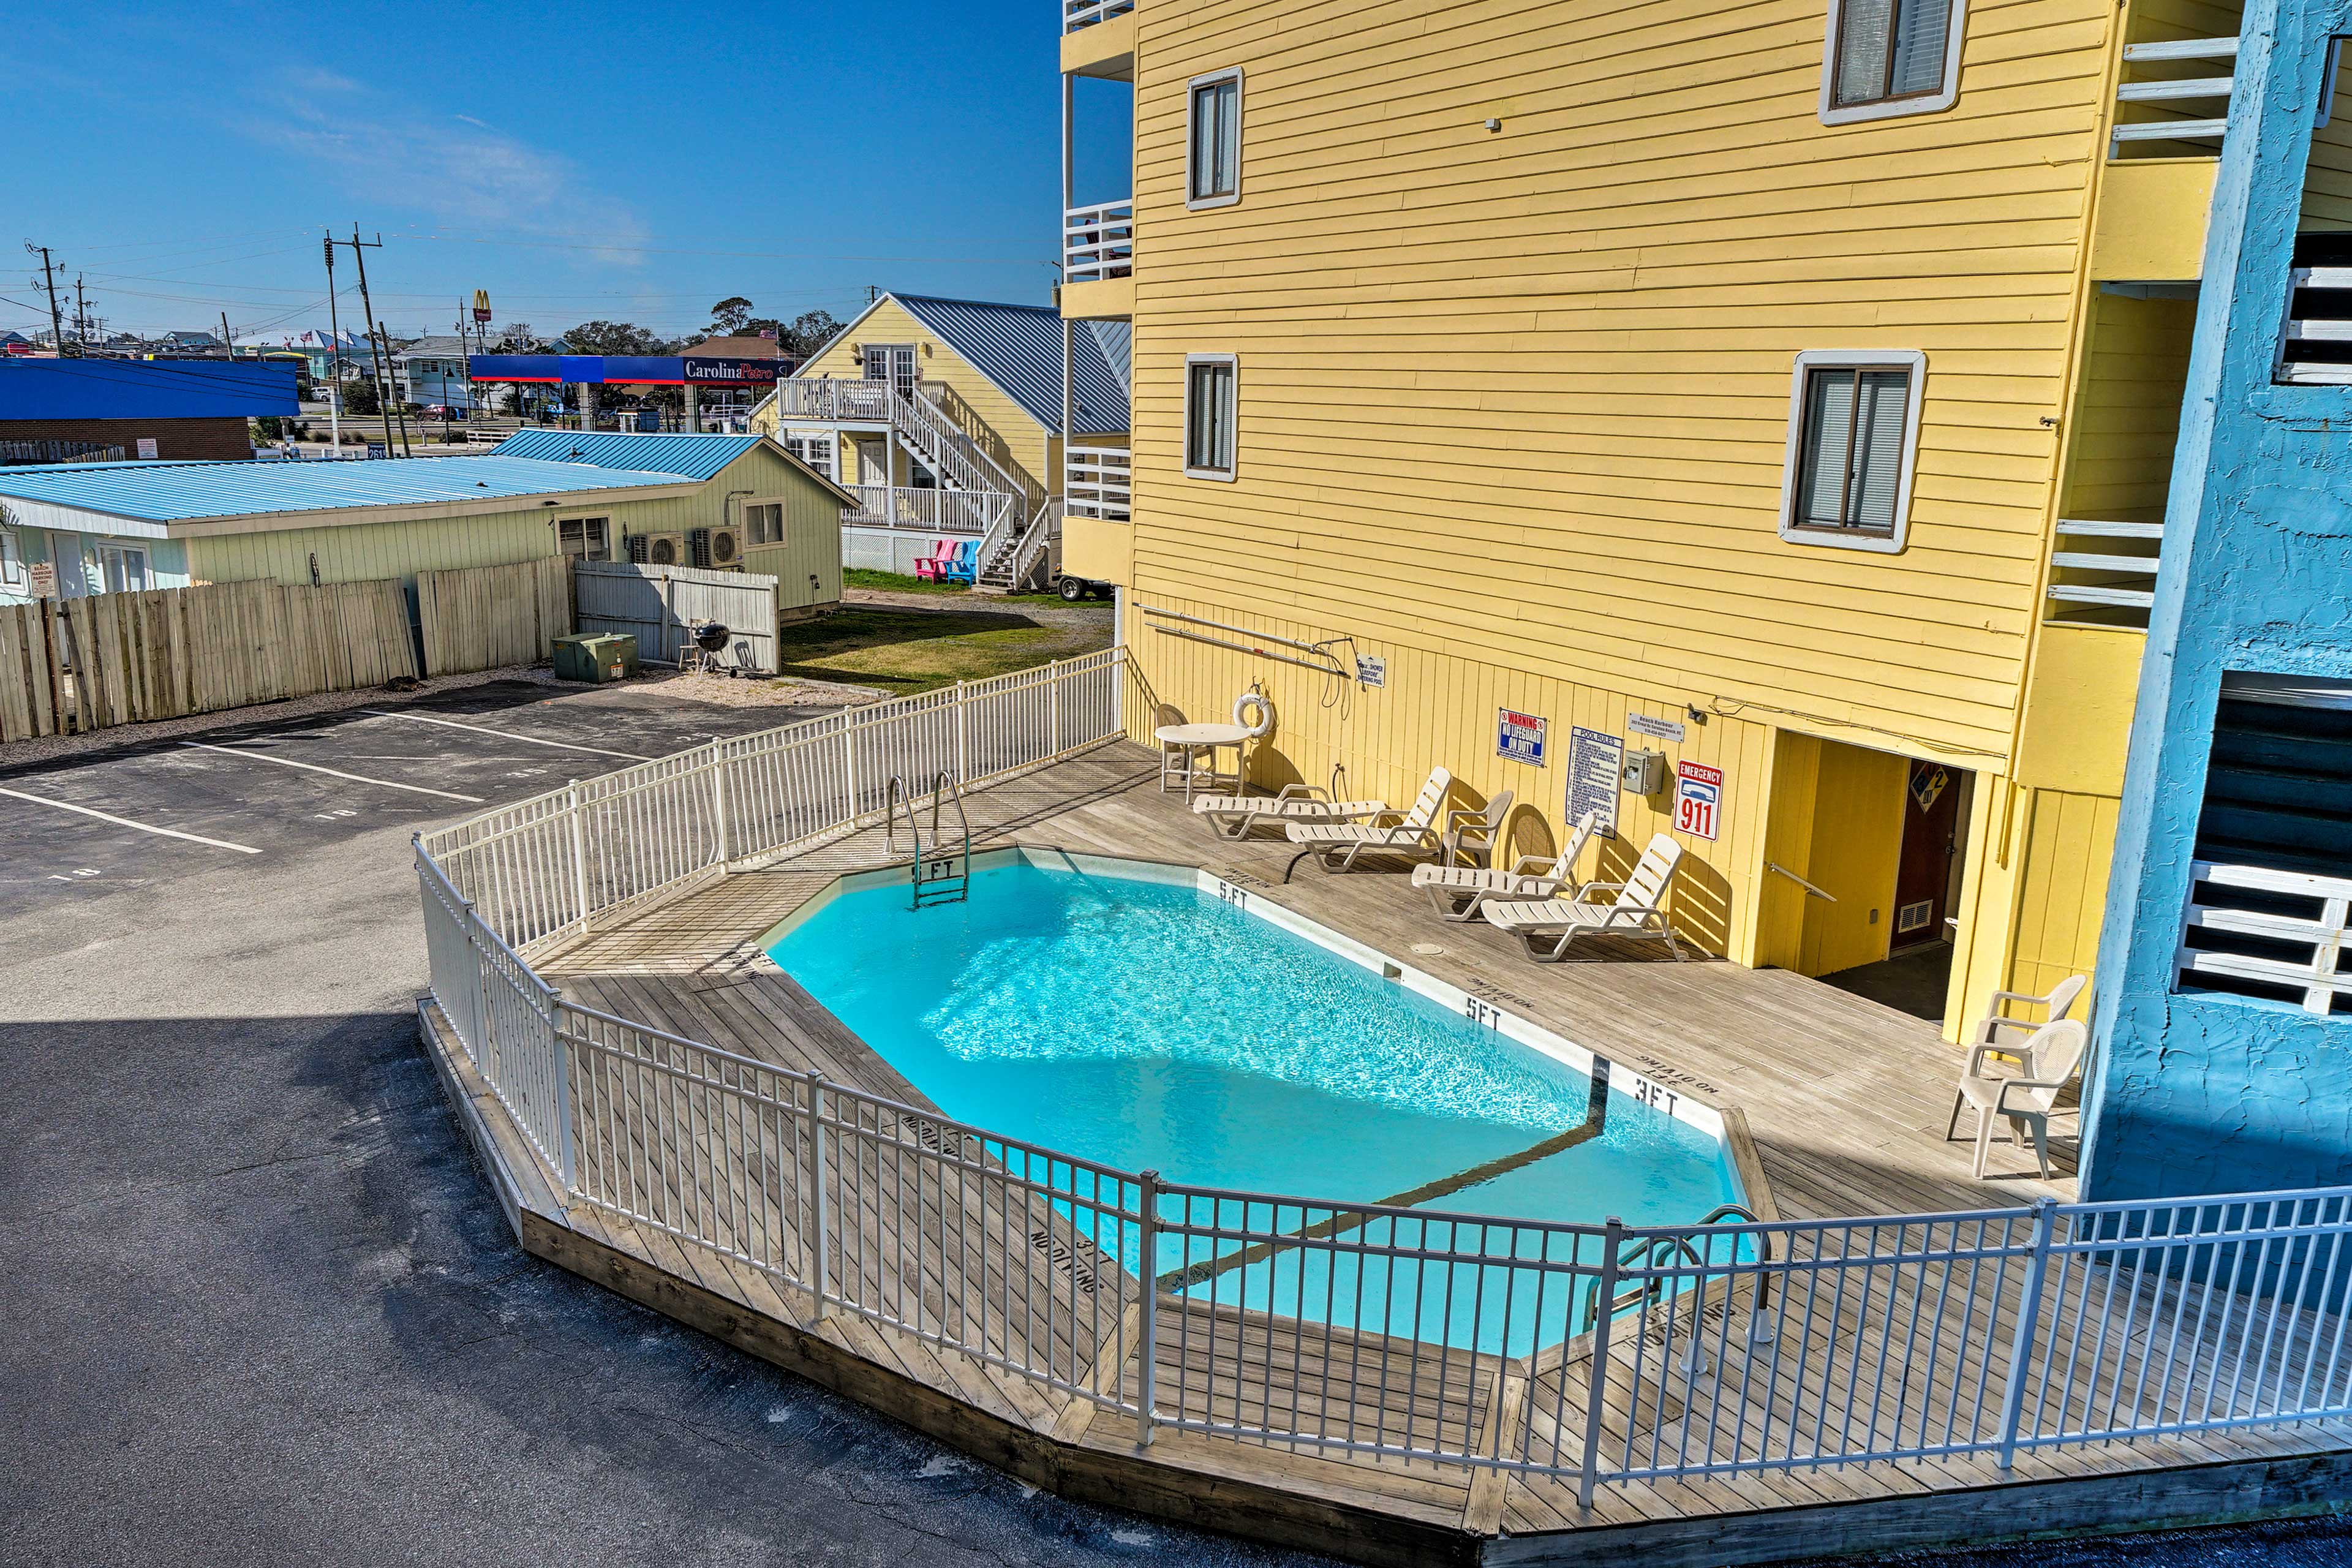 The community pool is a short walk from your door.